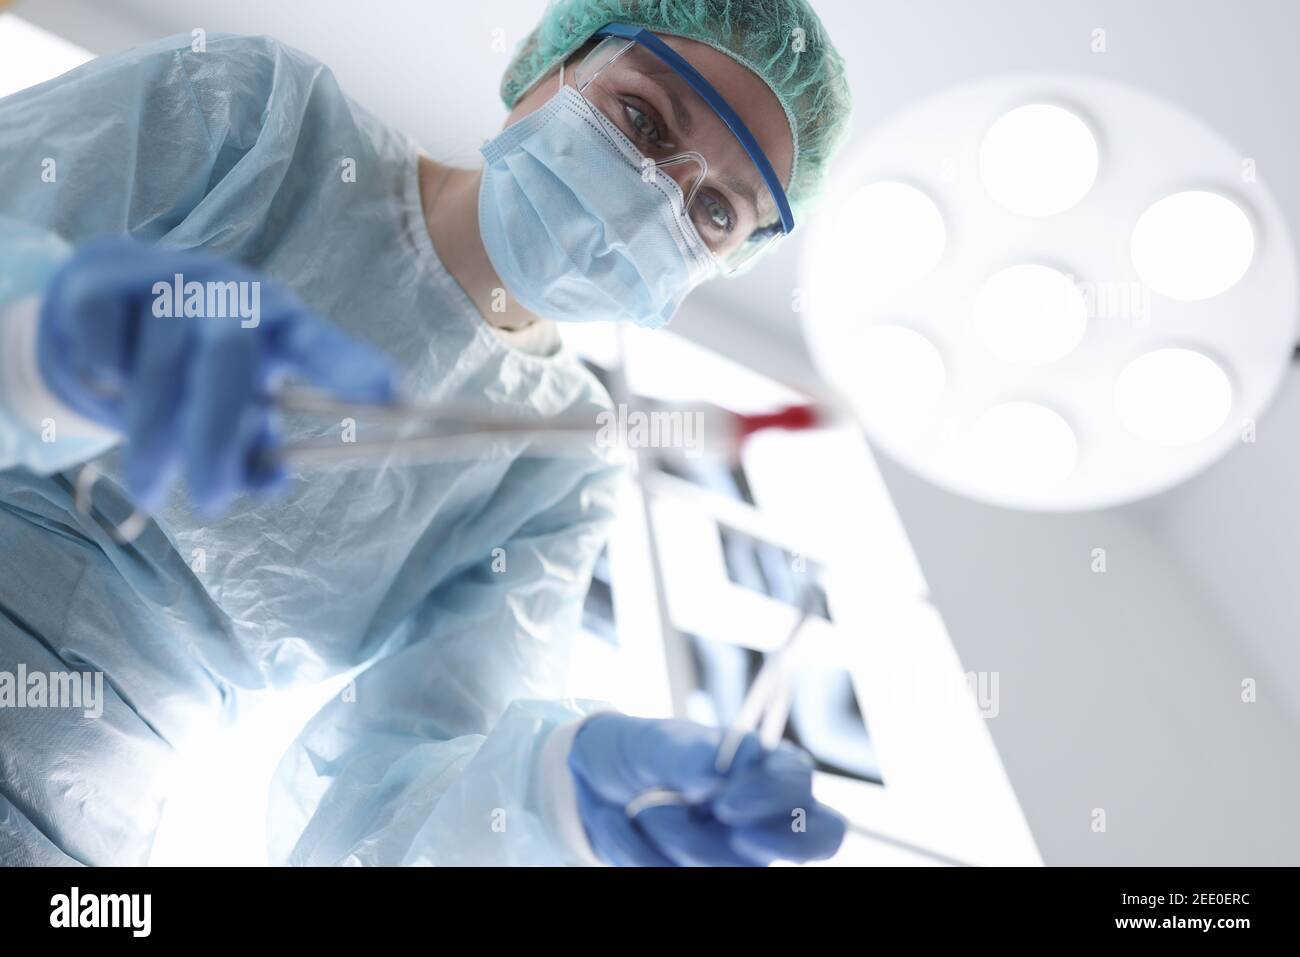 Surgeon female doctor in operating room portrait. Stock Photo